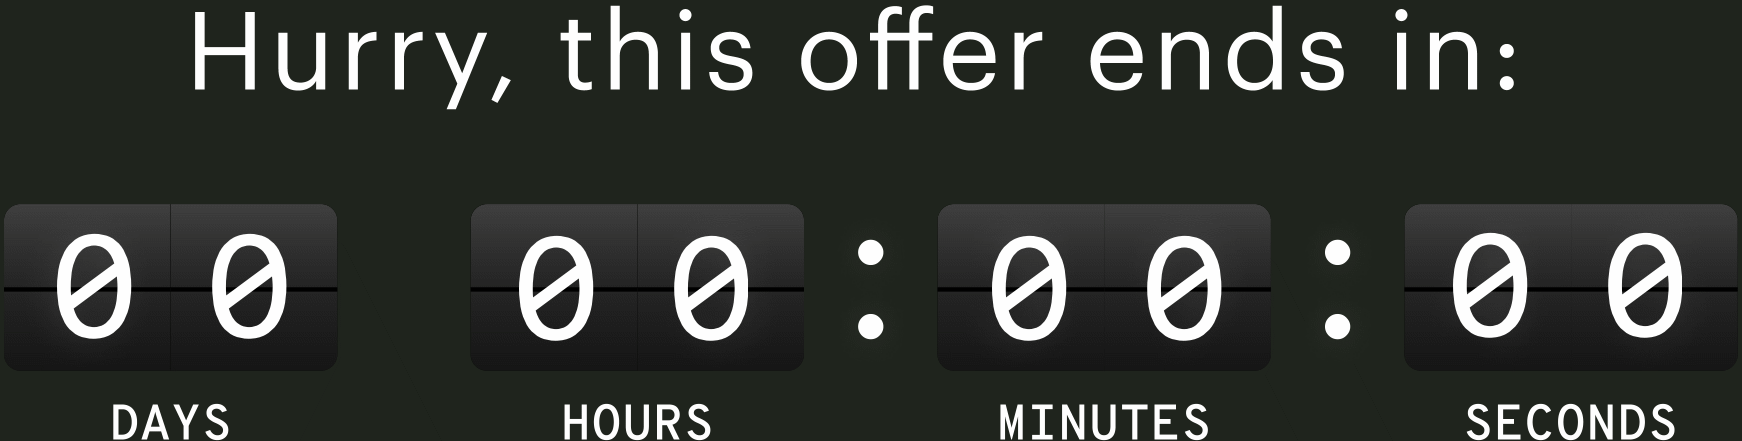 Hurry, this offer ends in: | DAYS | HOURS | MINUTES | SECONDS